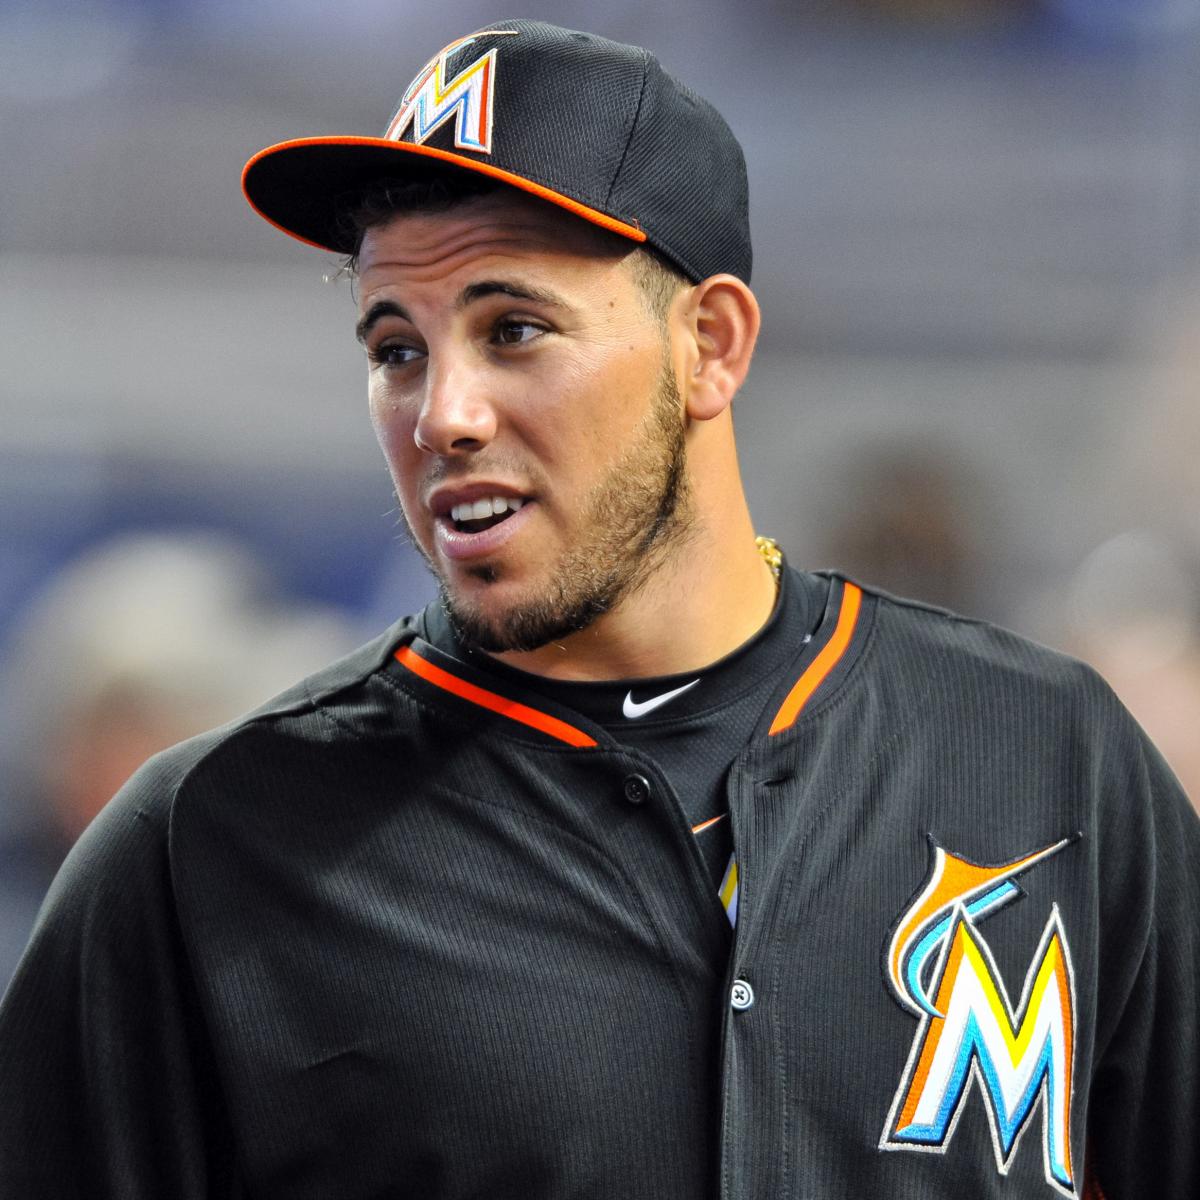 Jose Fernandez contract extension? Miami Marlins reportedly offer